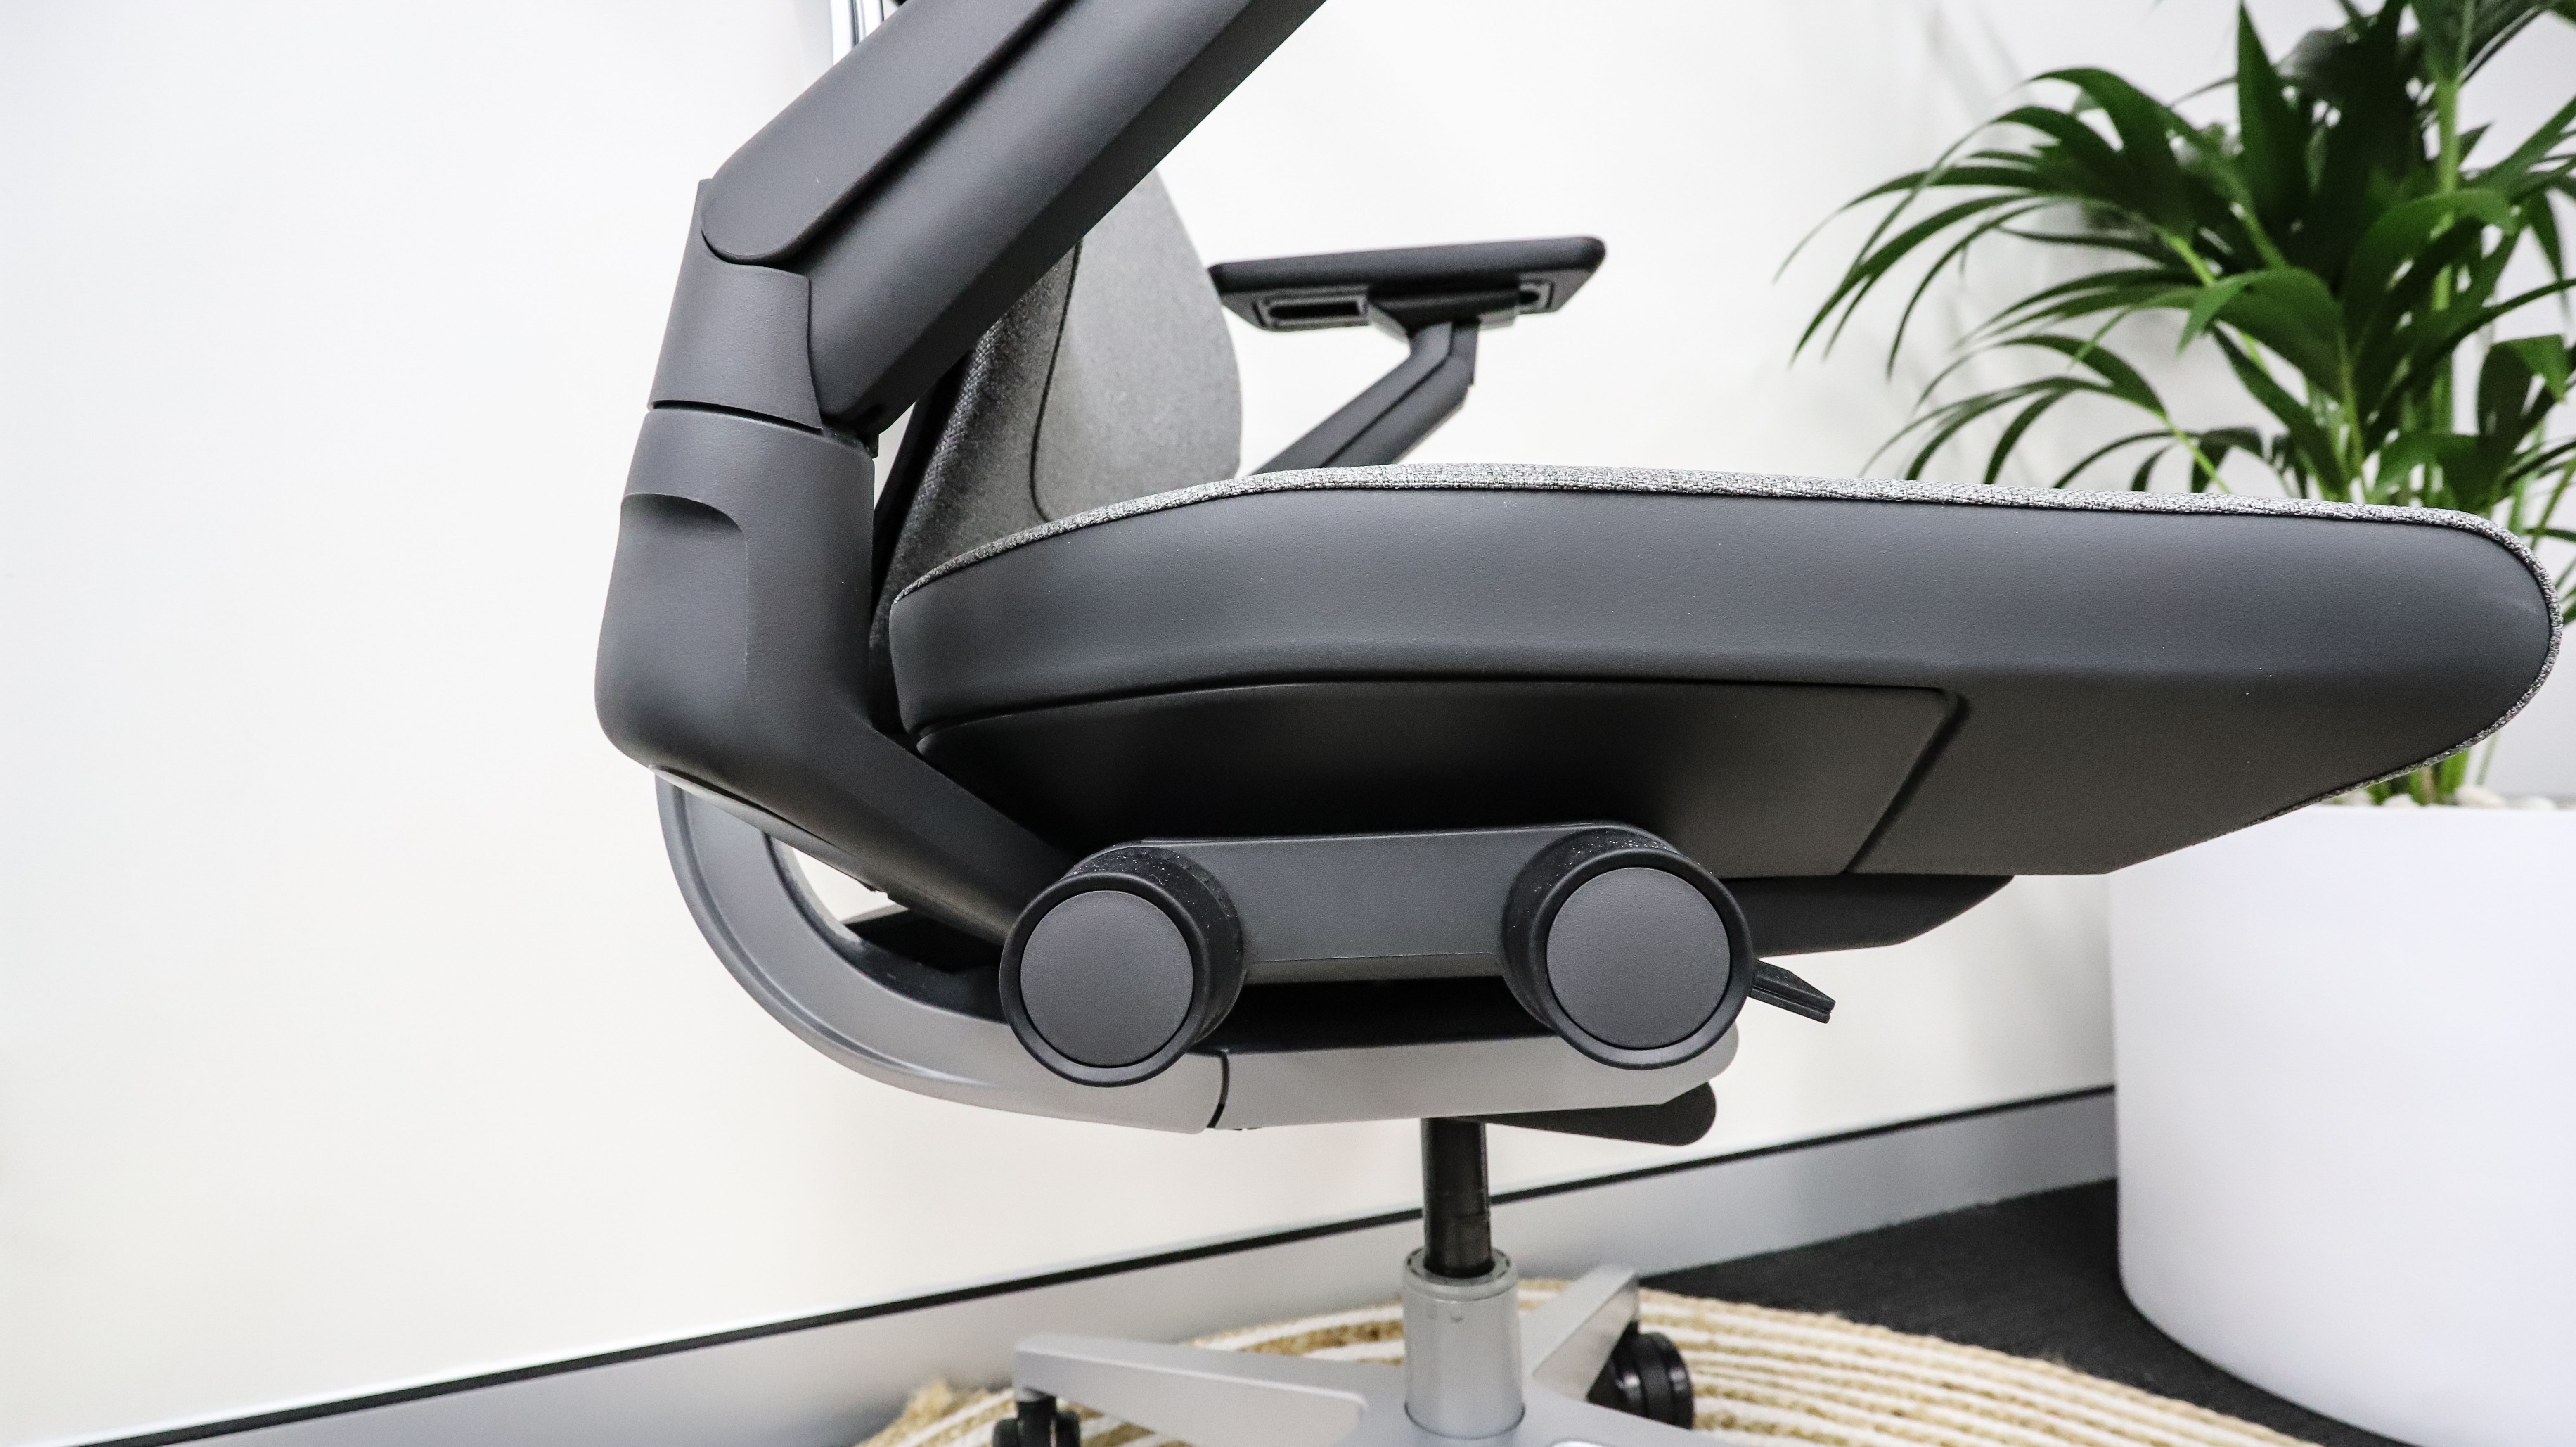 The adjustment knobs under the seat of the Steelcase Gesture